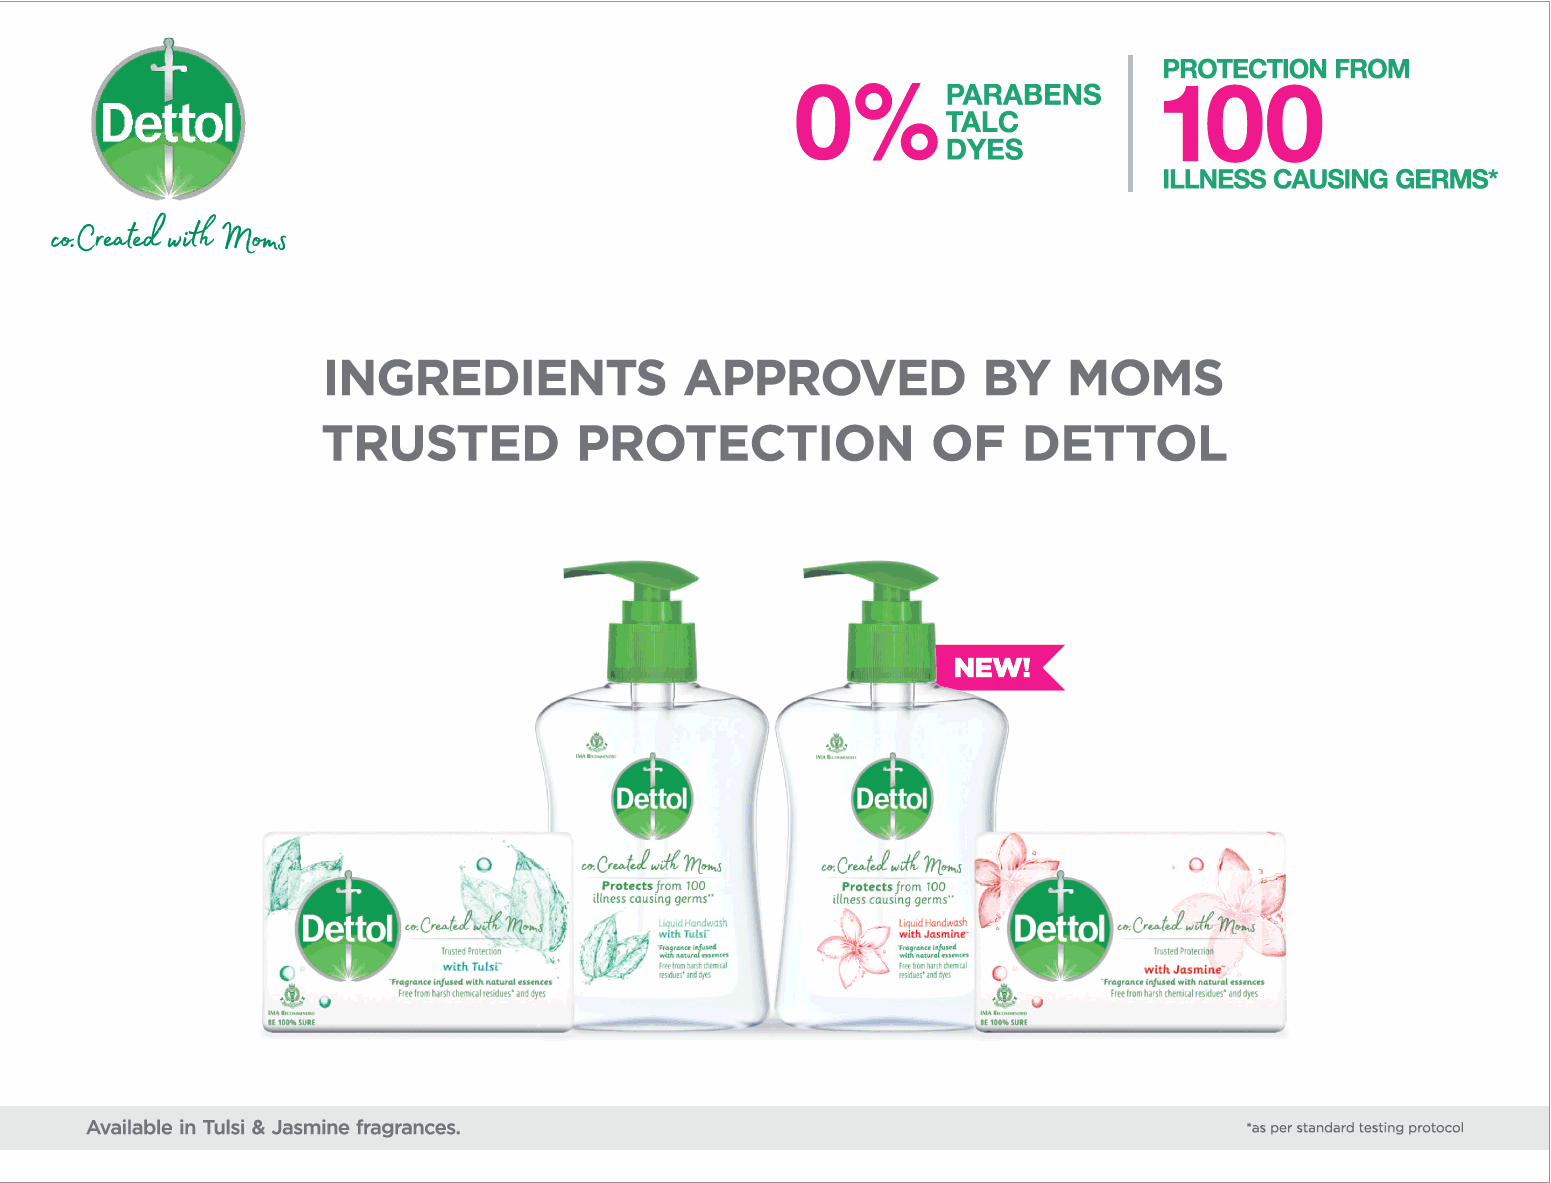 dettol-ingredients-approved-by-moms-ad-times-of-india-delhi-23-06-2019.png